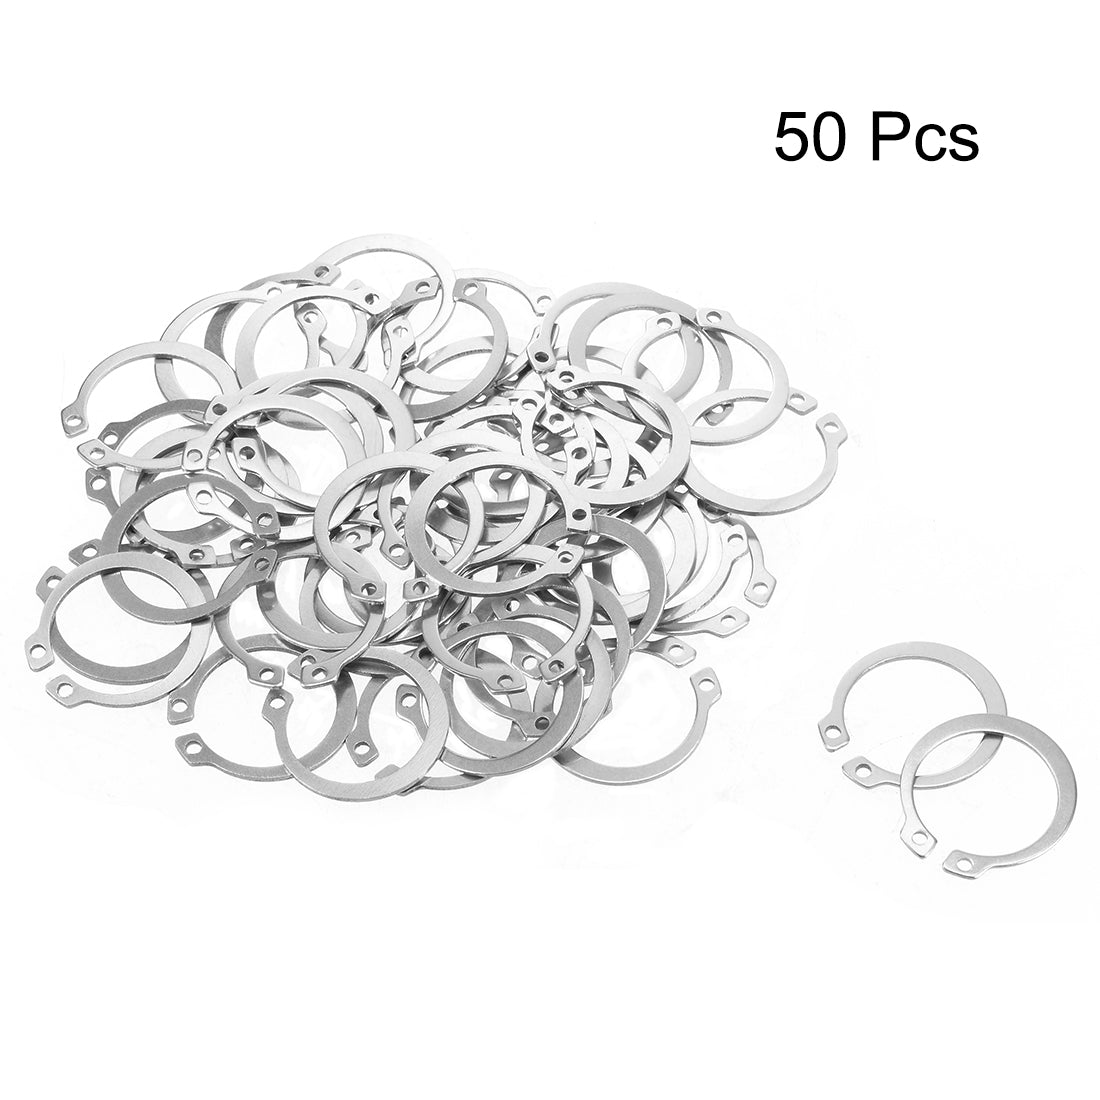 uxcell Uxcell 28.2mm External Circlips Retaining Shaft Snap Rings 304 Stainless Steel 50pcs